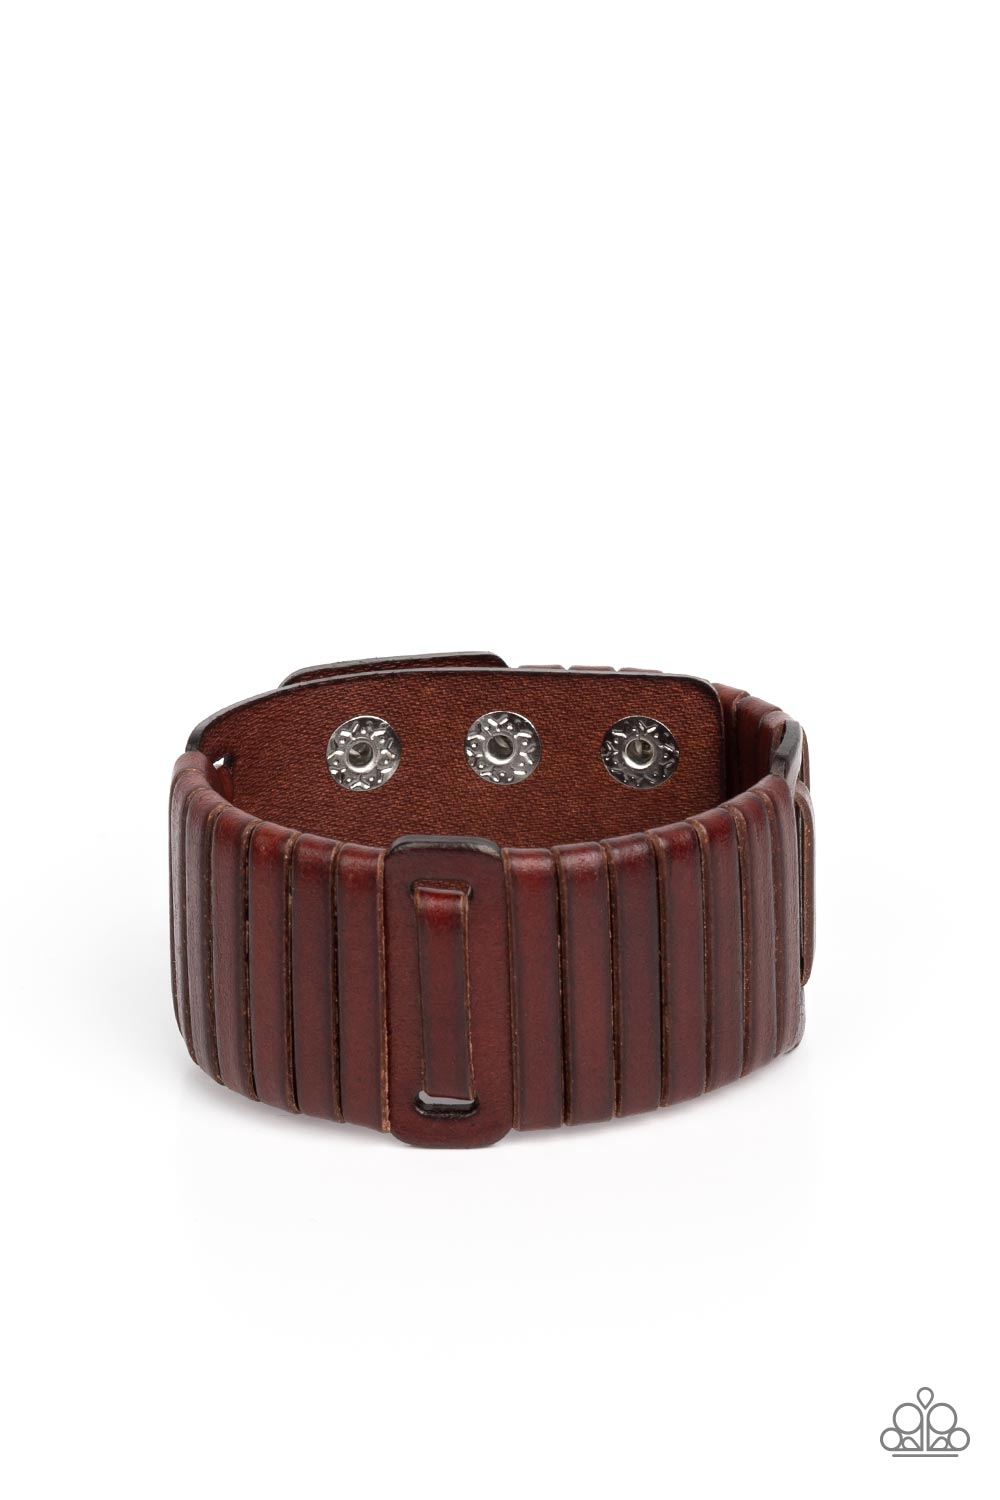 Leather Lumberyard - Brown Urban Bracelet - Paparazzi Accessories - A brown leather lace is wrapped around and through a thick brown leather band, resulting in a rugged centerpiece around the wrist. Features an adjustable snap closure.